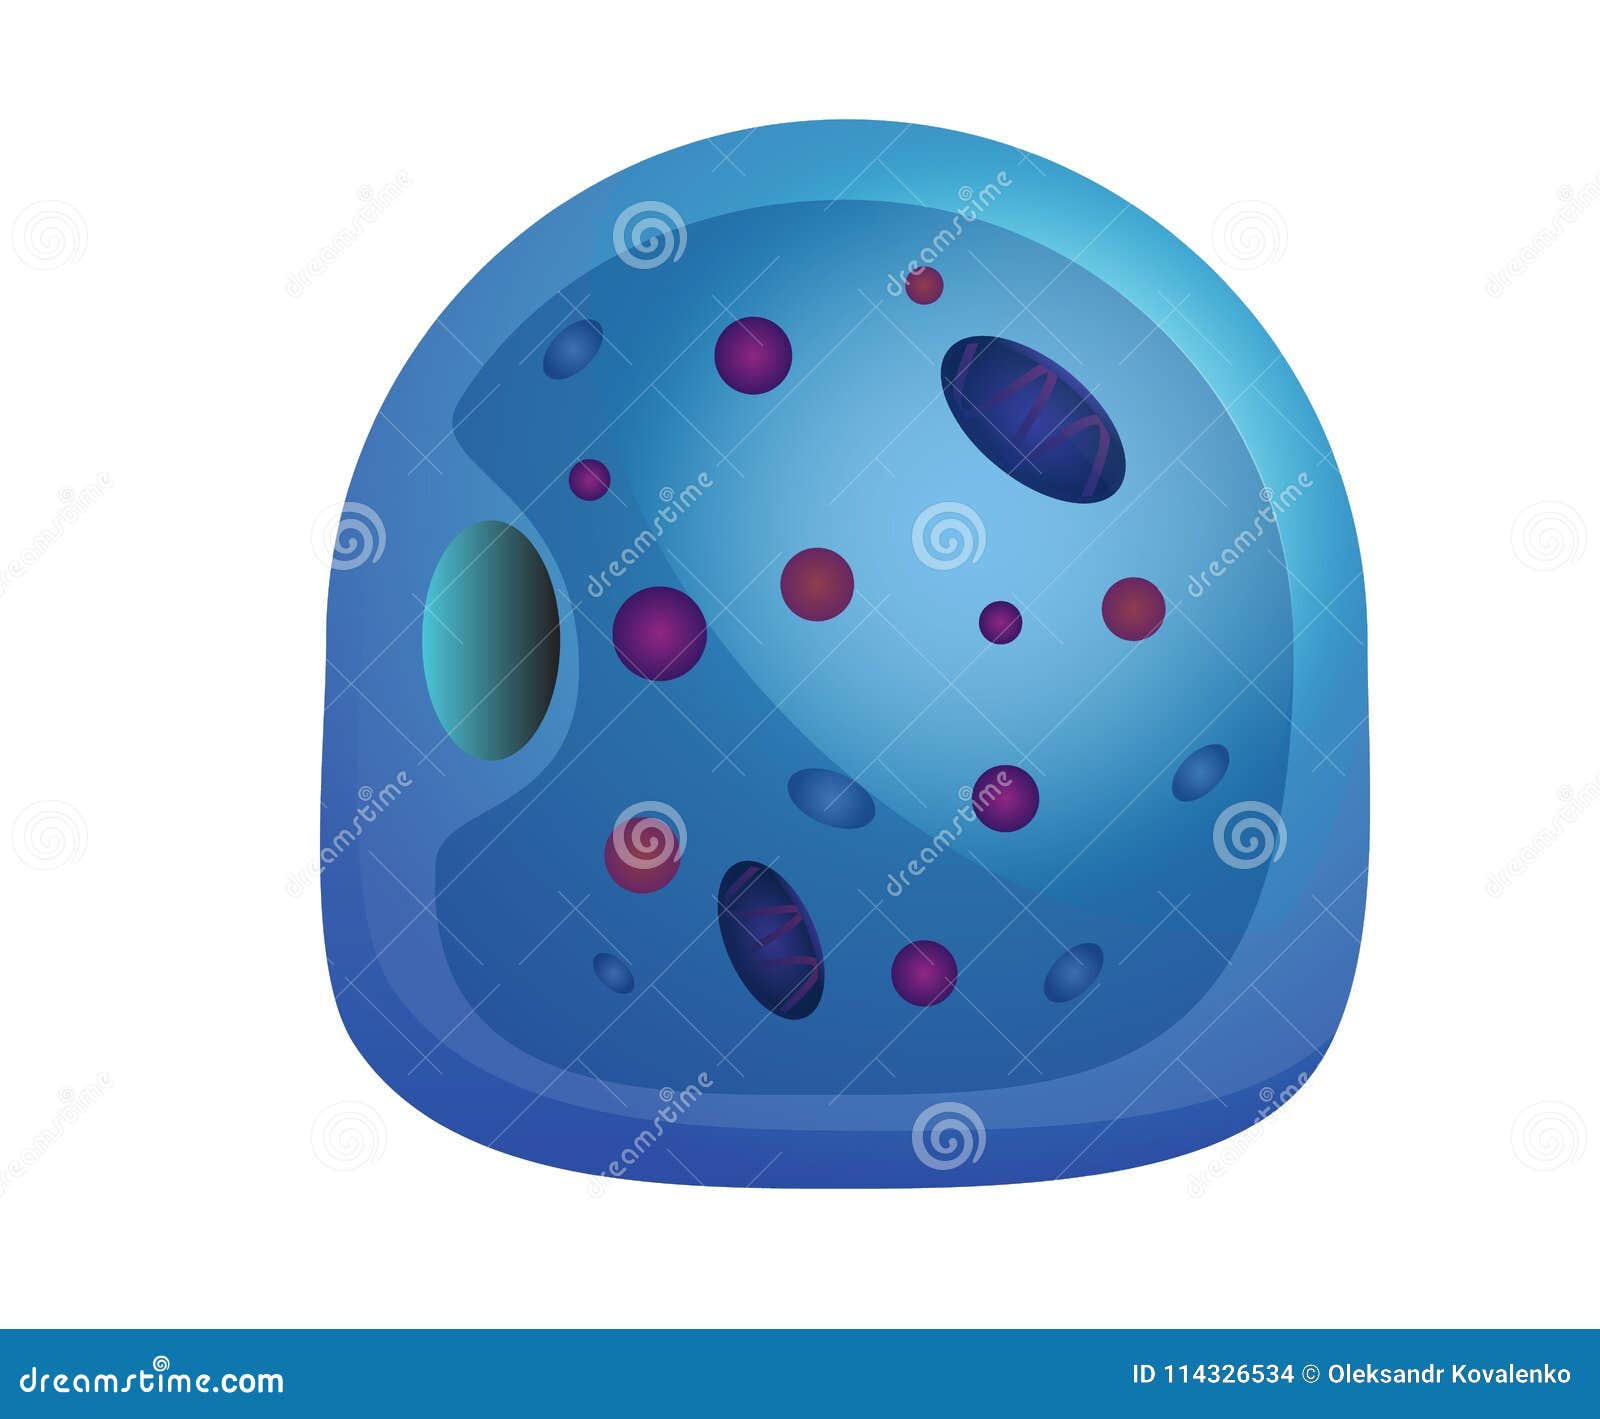 human cell 